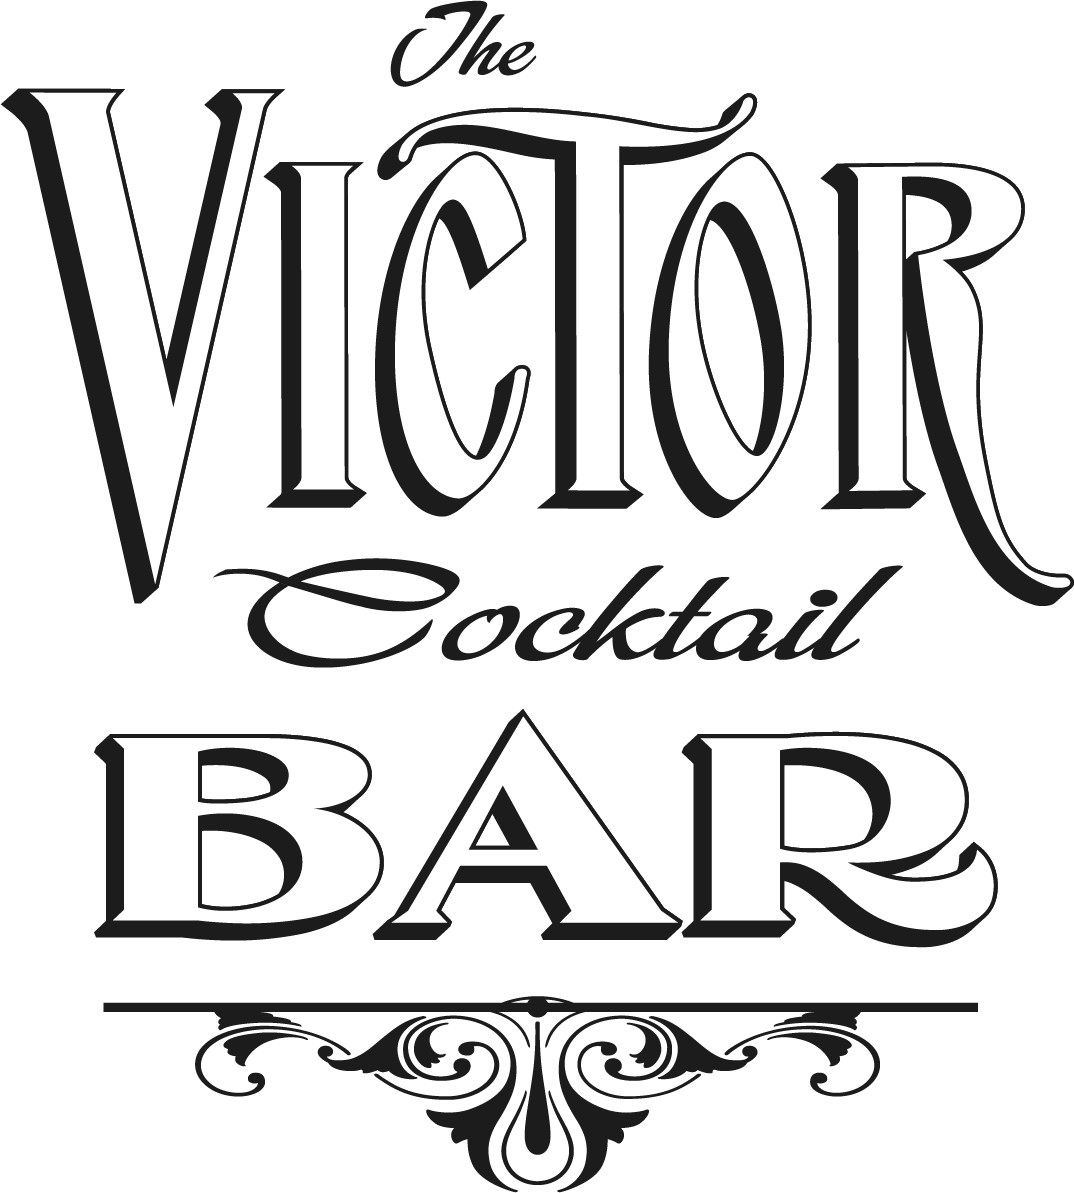 The Victor Bar Chicago